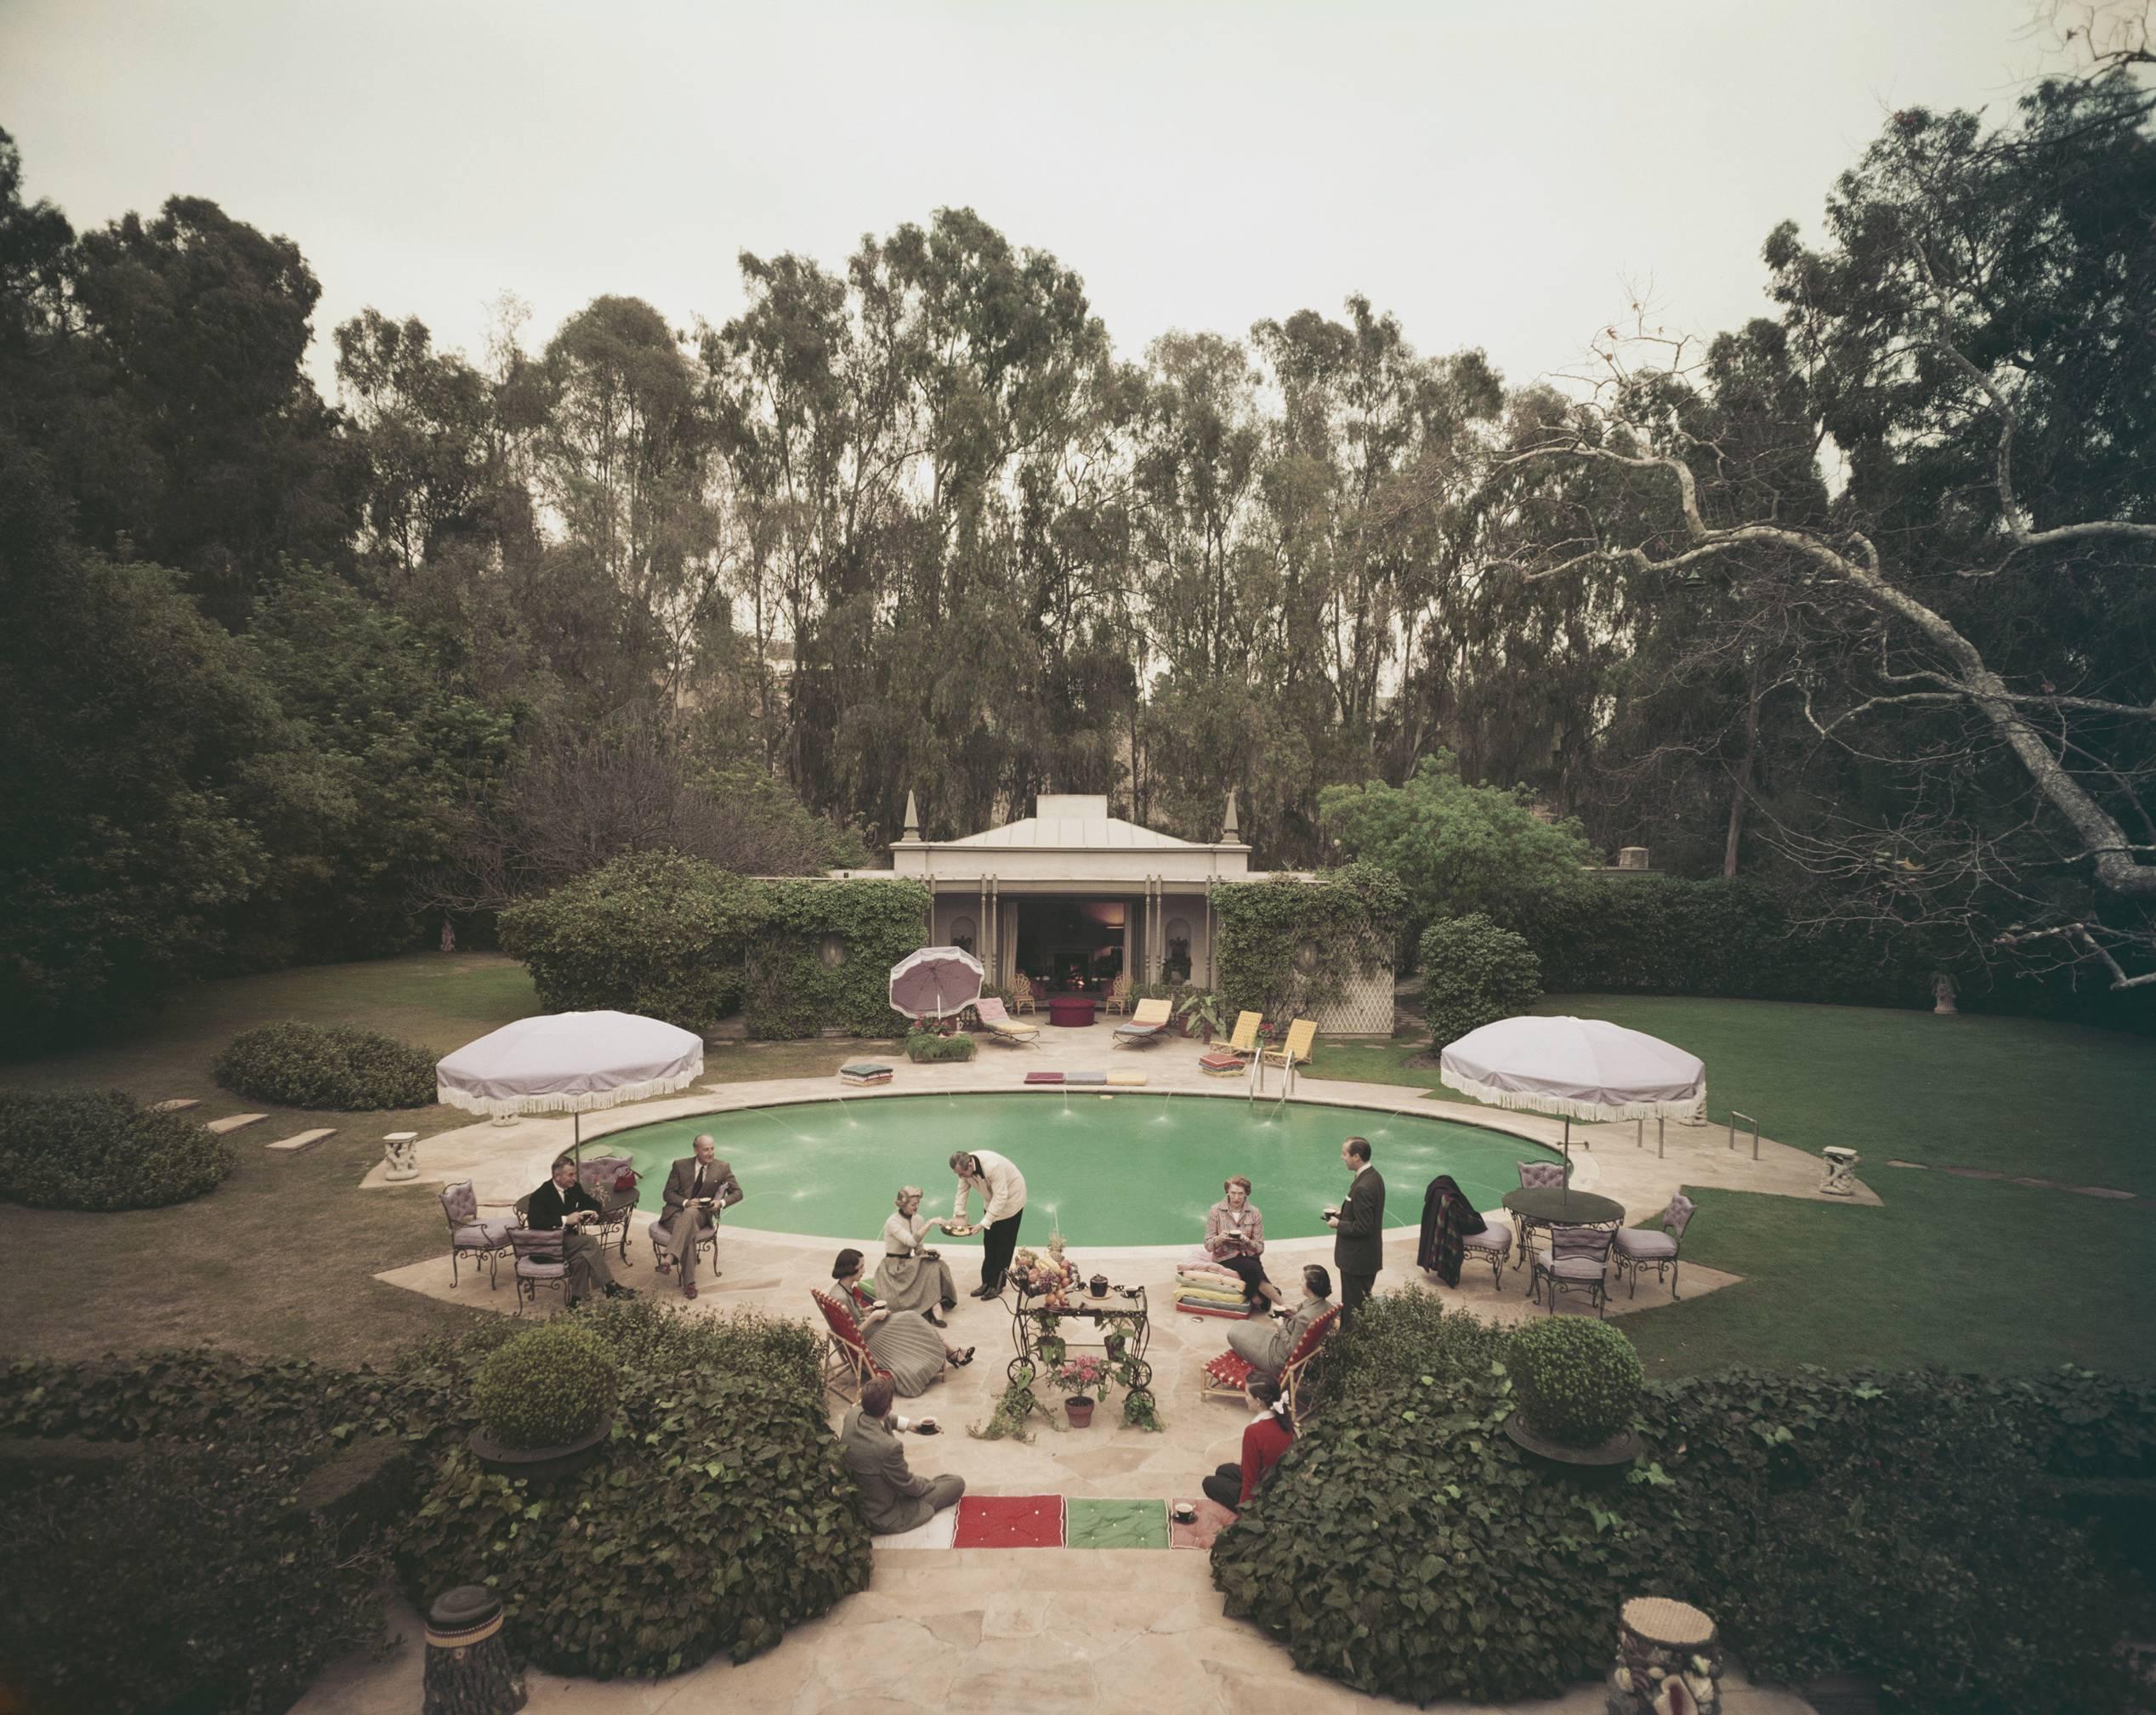 'Scone Madam'  (Slim Aarons Estate Edition)

Afternoon tea round the pool on a cold day at the home of interior decorator James Pendleton in Beverly Hill, 1960. Fashionably smartly dressed guests enjoy afternoon tea  served by a butler beside the